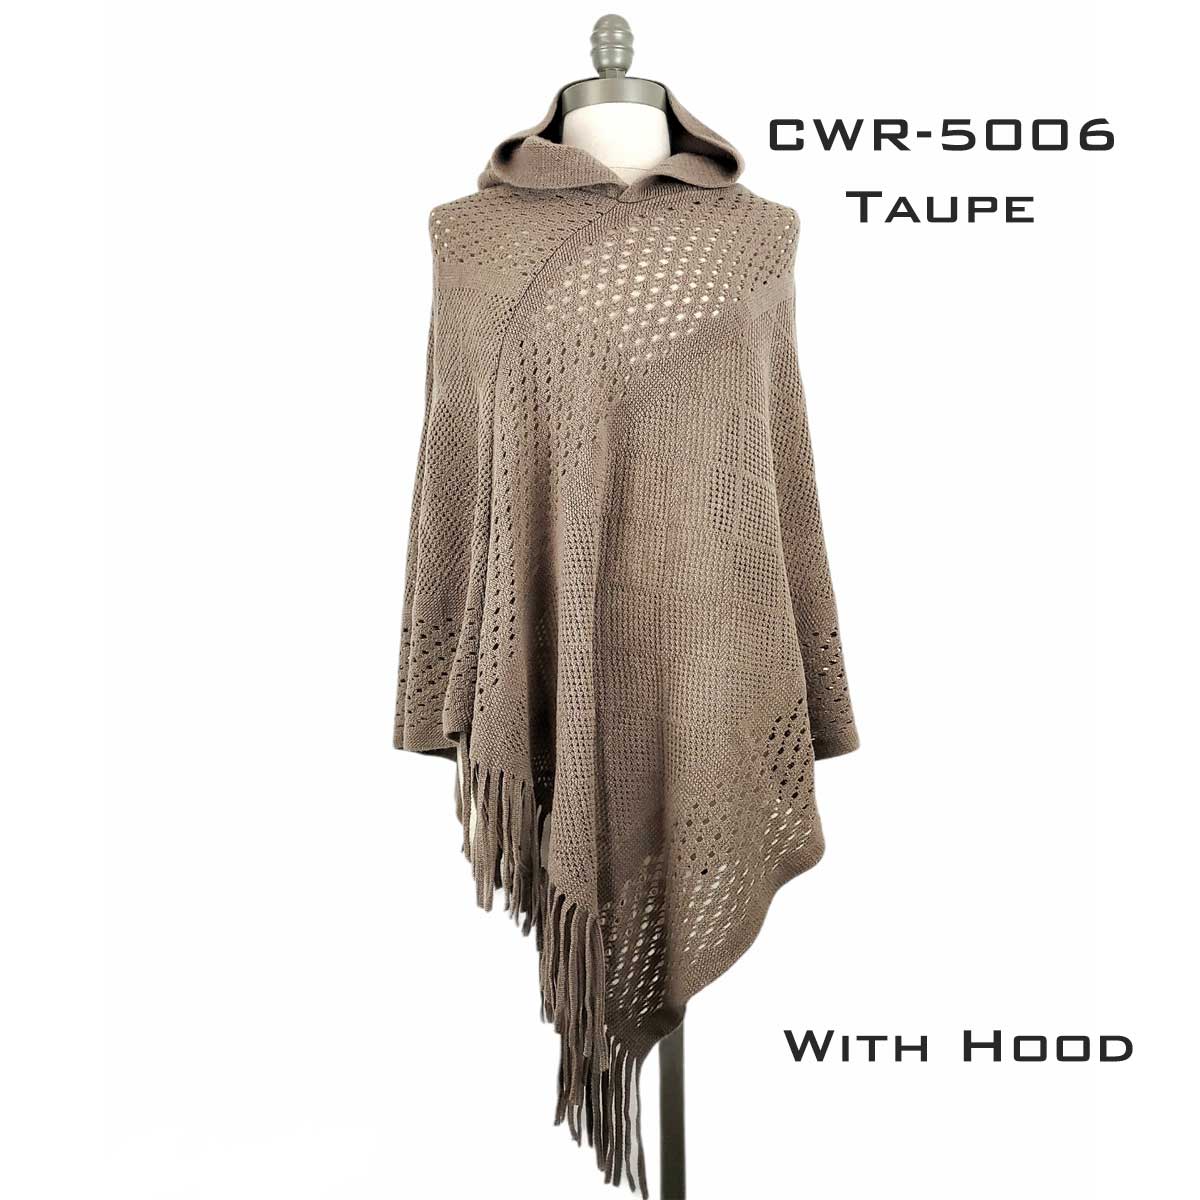 CWR5006 TAUPE Hooded Poncho with Fringe